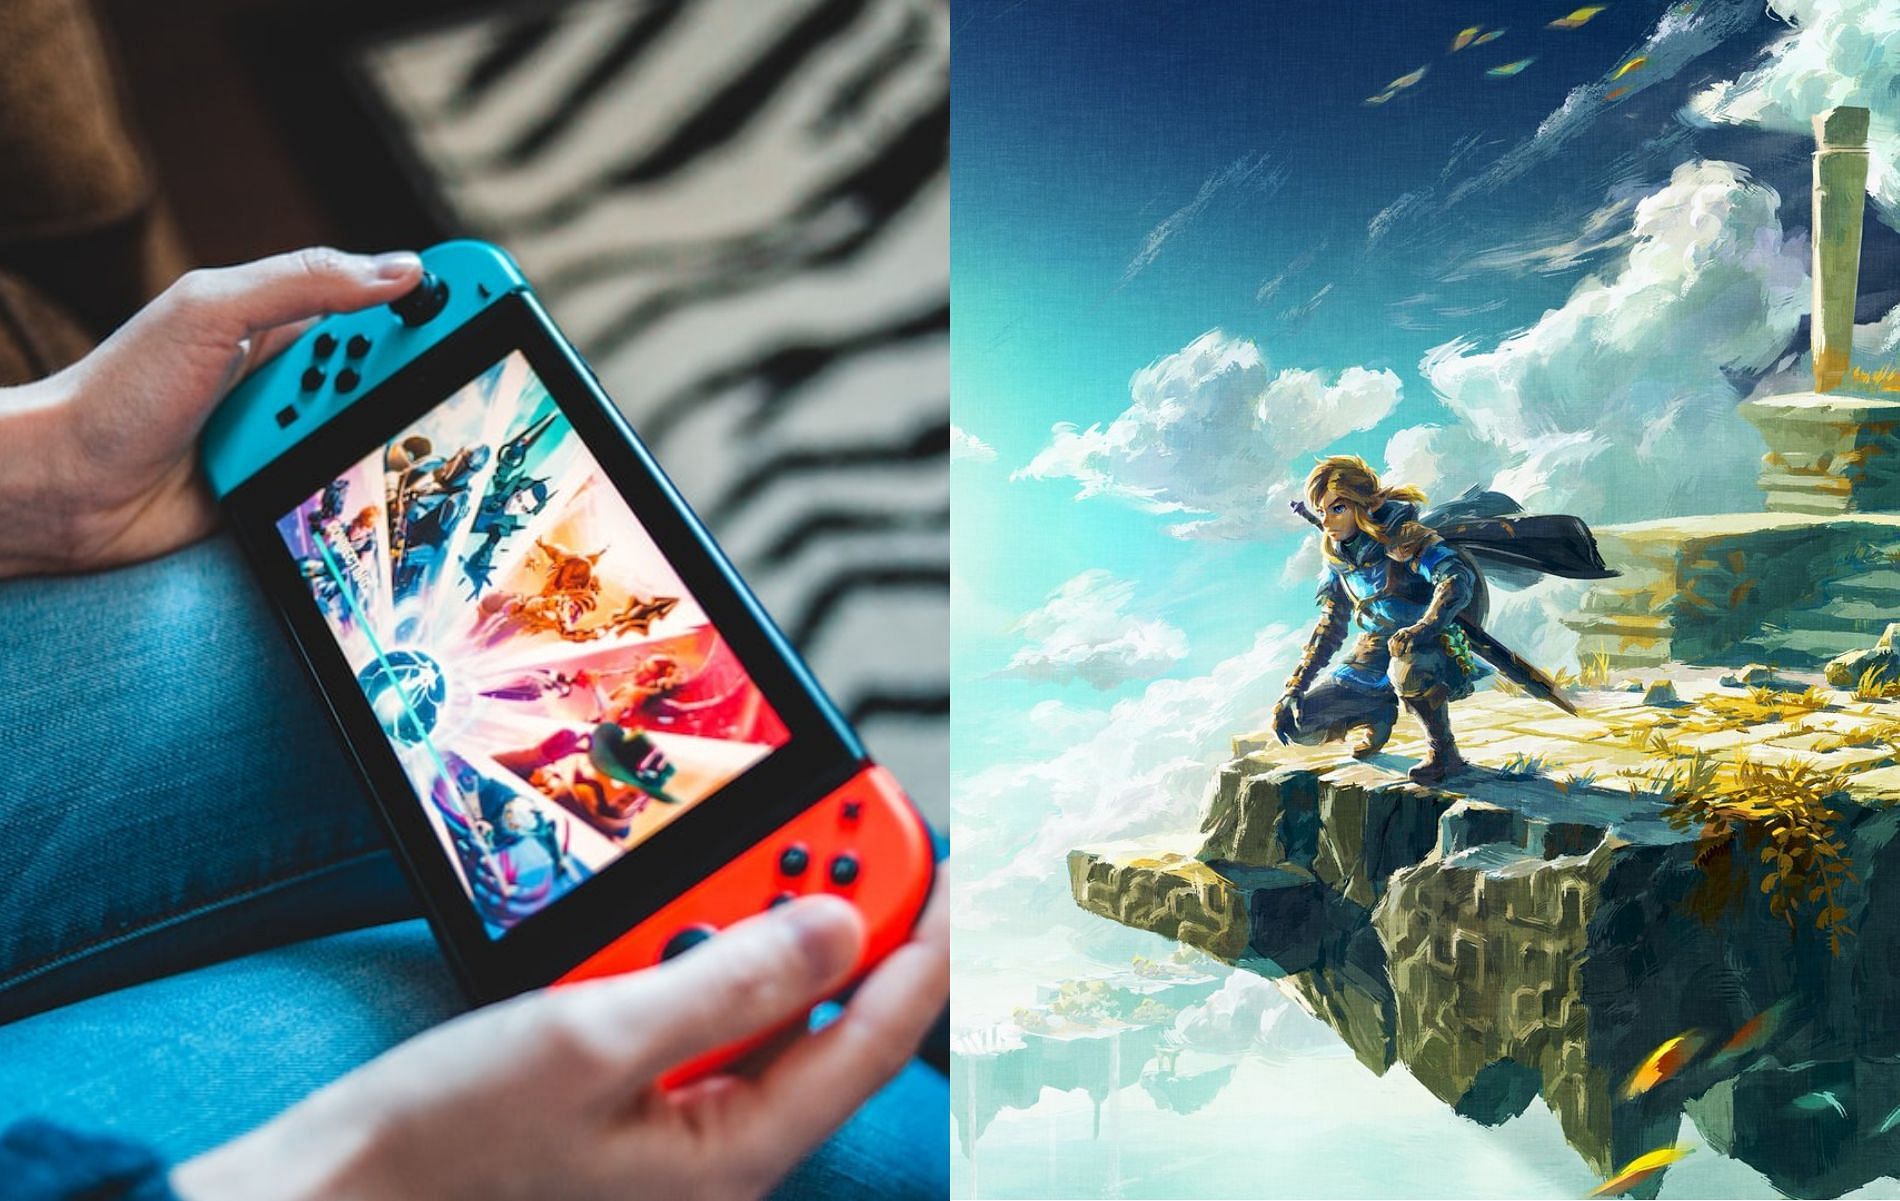 Fans of the gaming giant may have to brace for this one (Images via Nintendo)